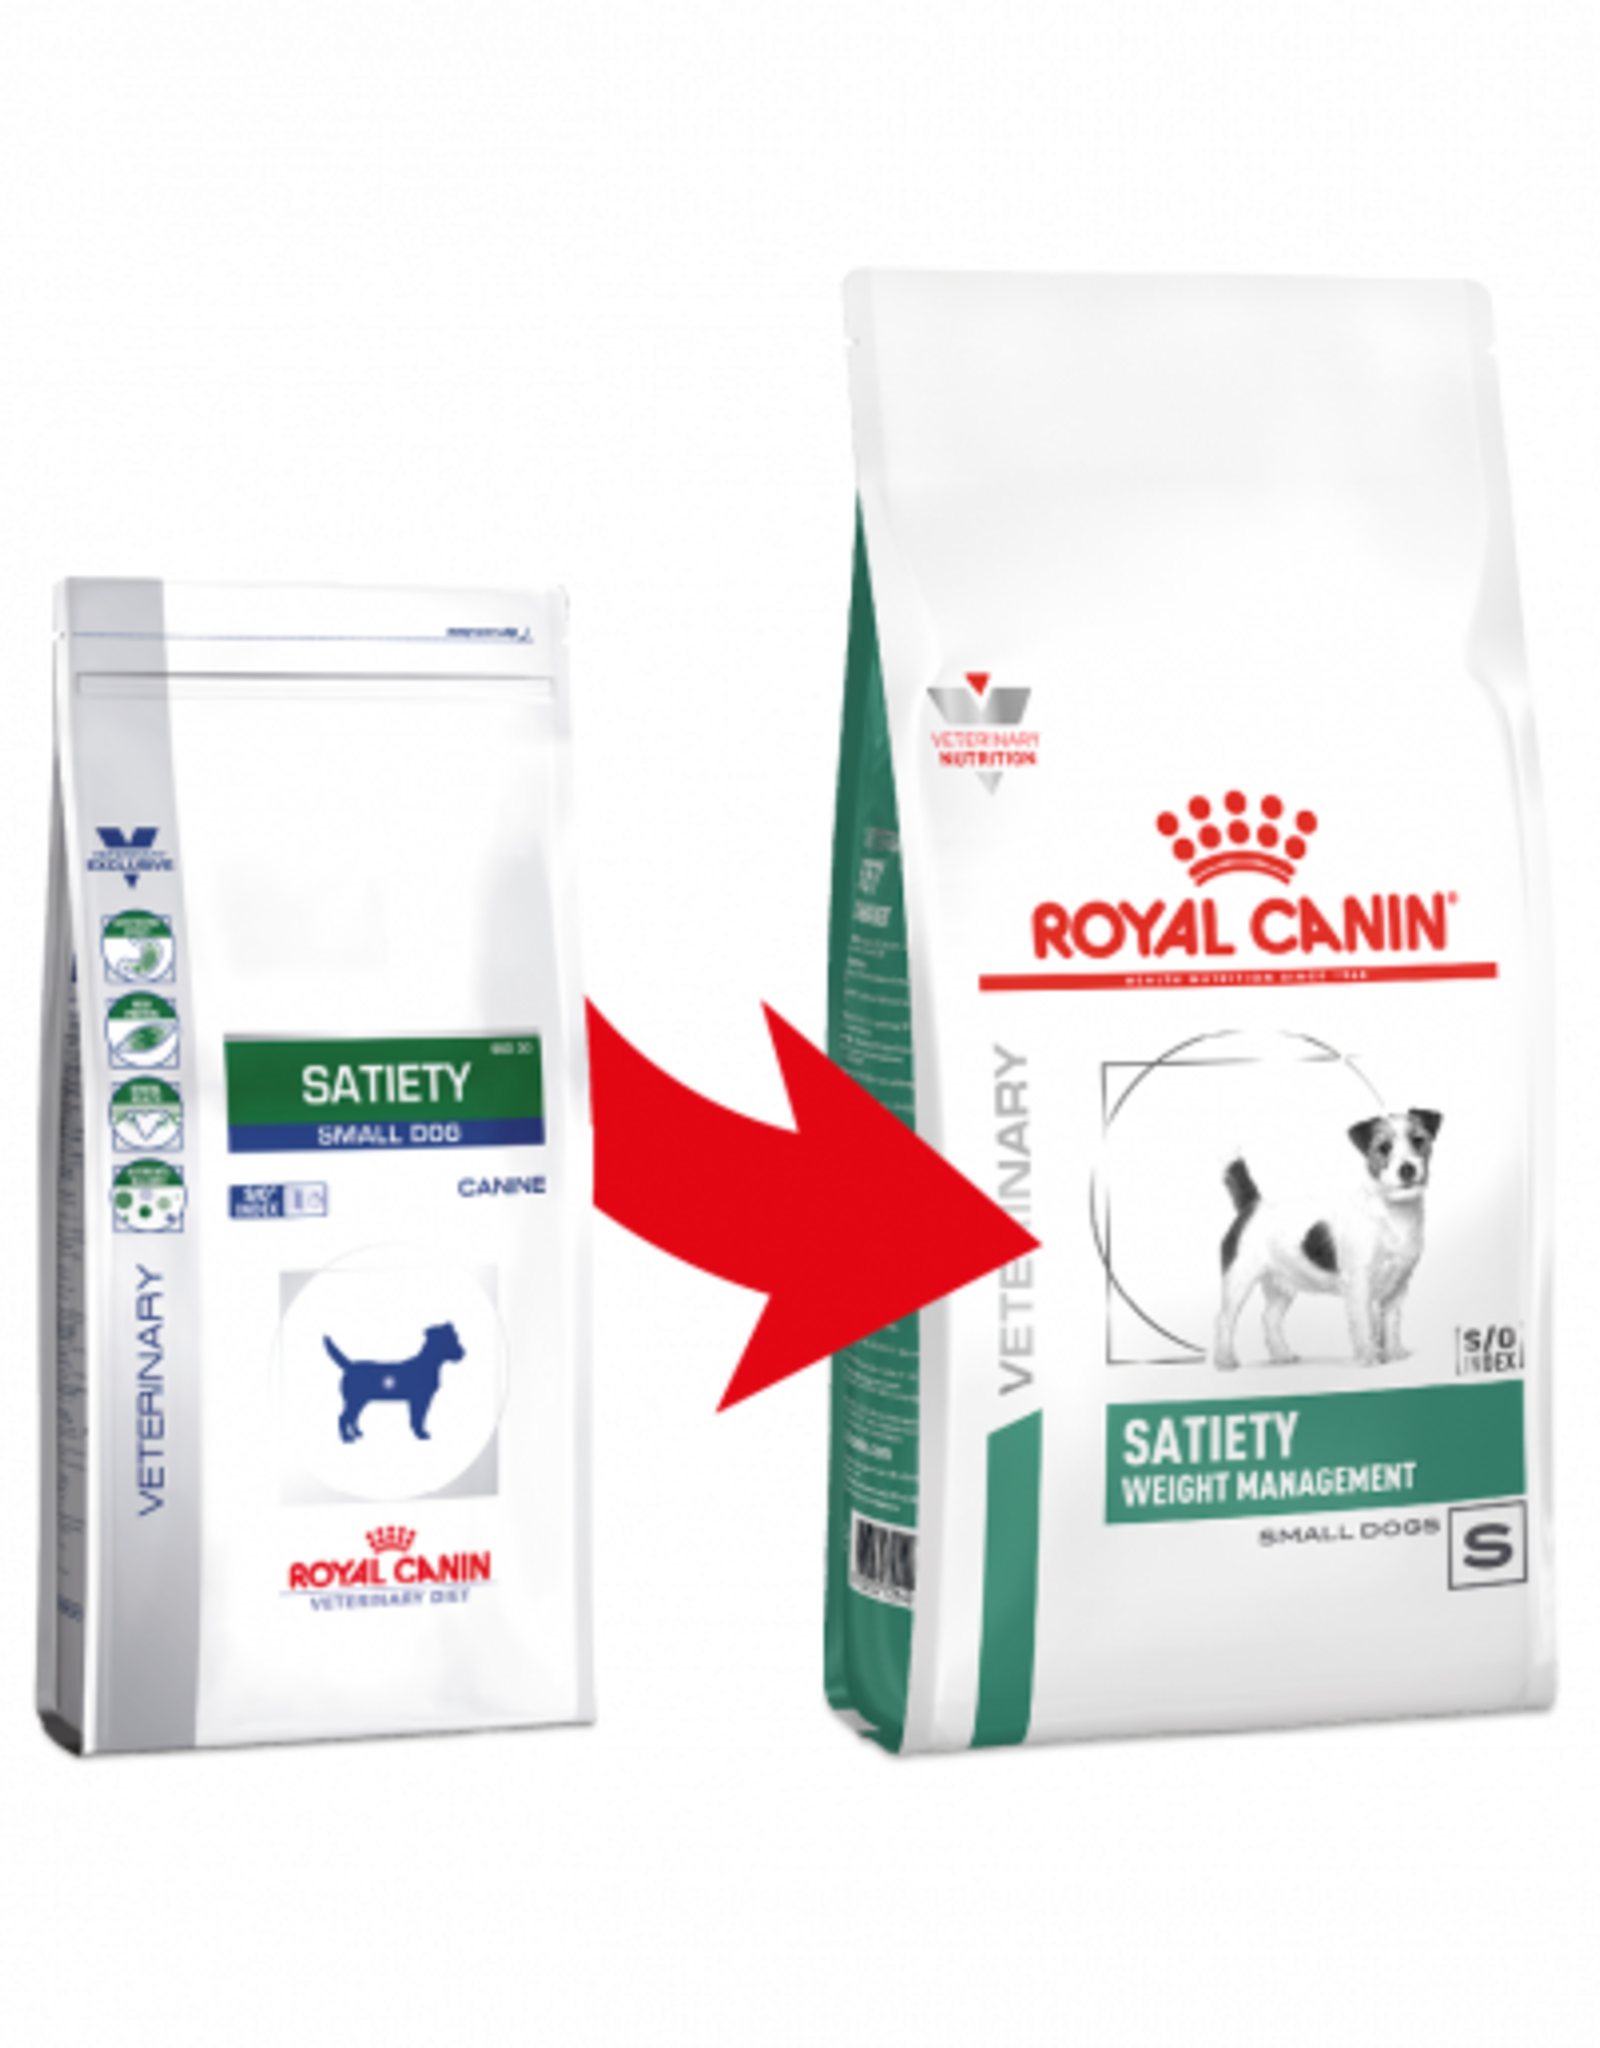 Royal Canin Royal Canin Vdiet Satiety Hund Small 8kg